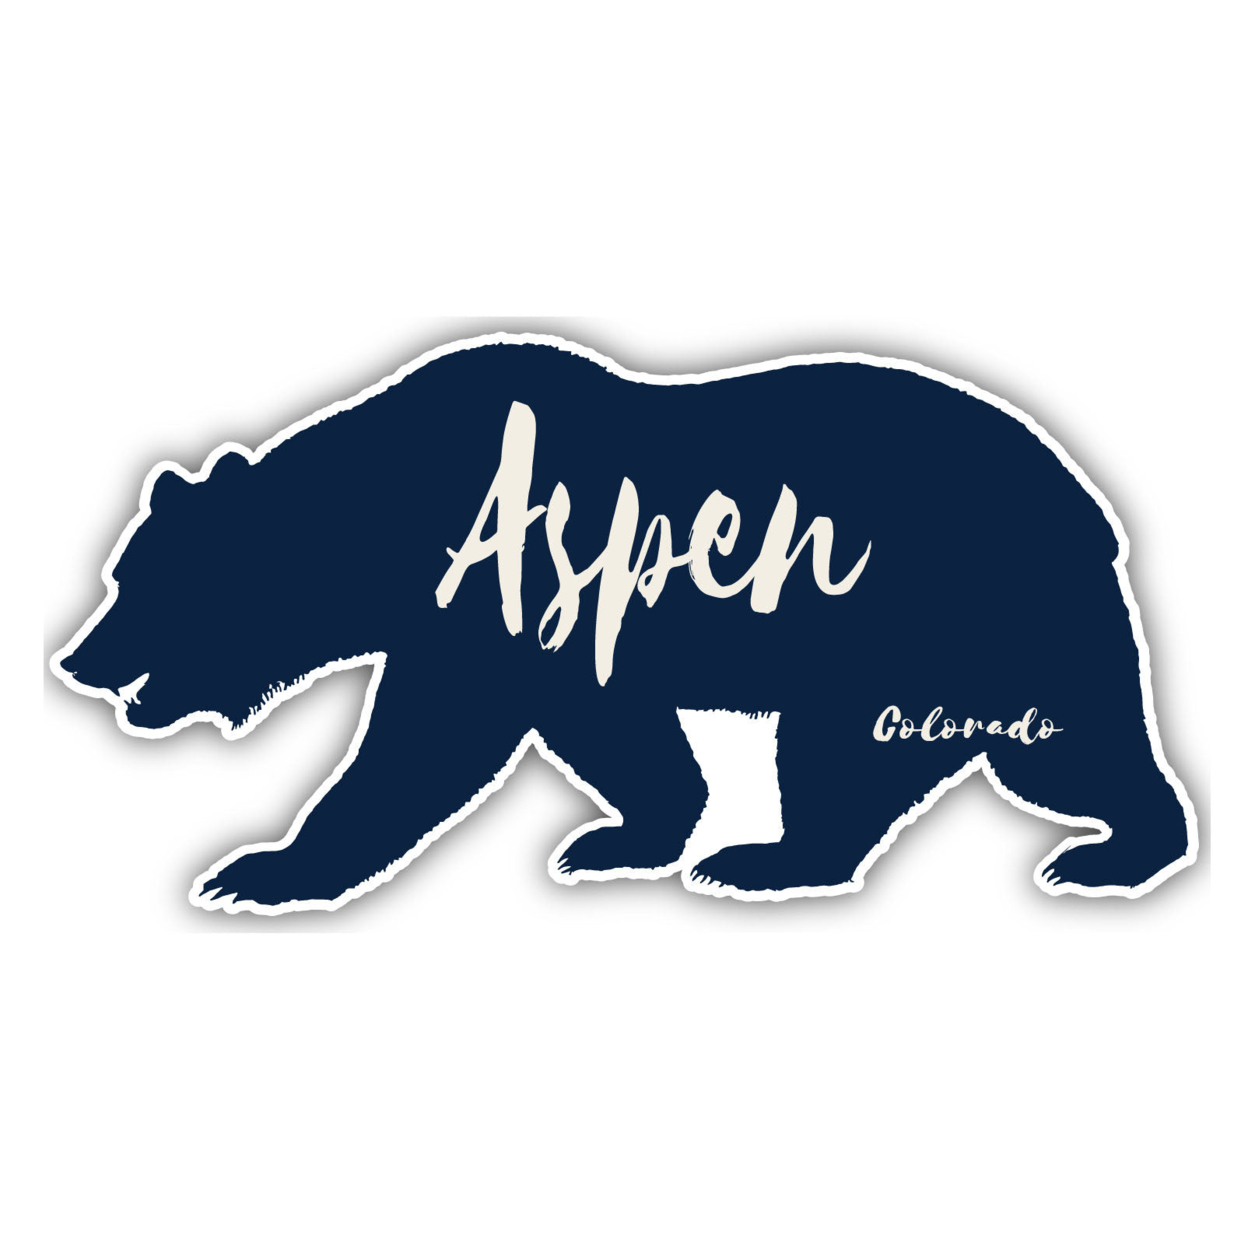 Aspen Colorado Souvenir Decorative Stickers (Choose Theme And Size) - 4-Pack, 2-Inch, Great Outdoors